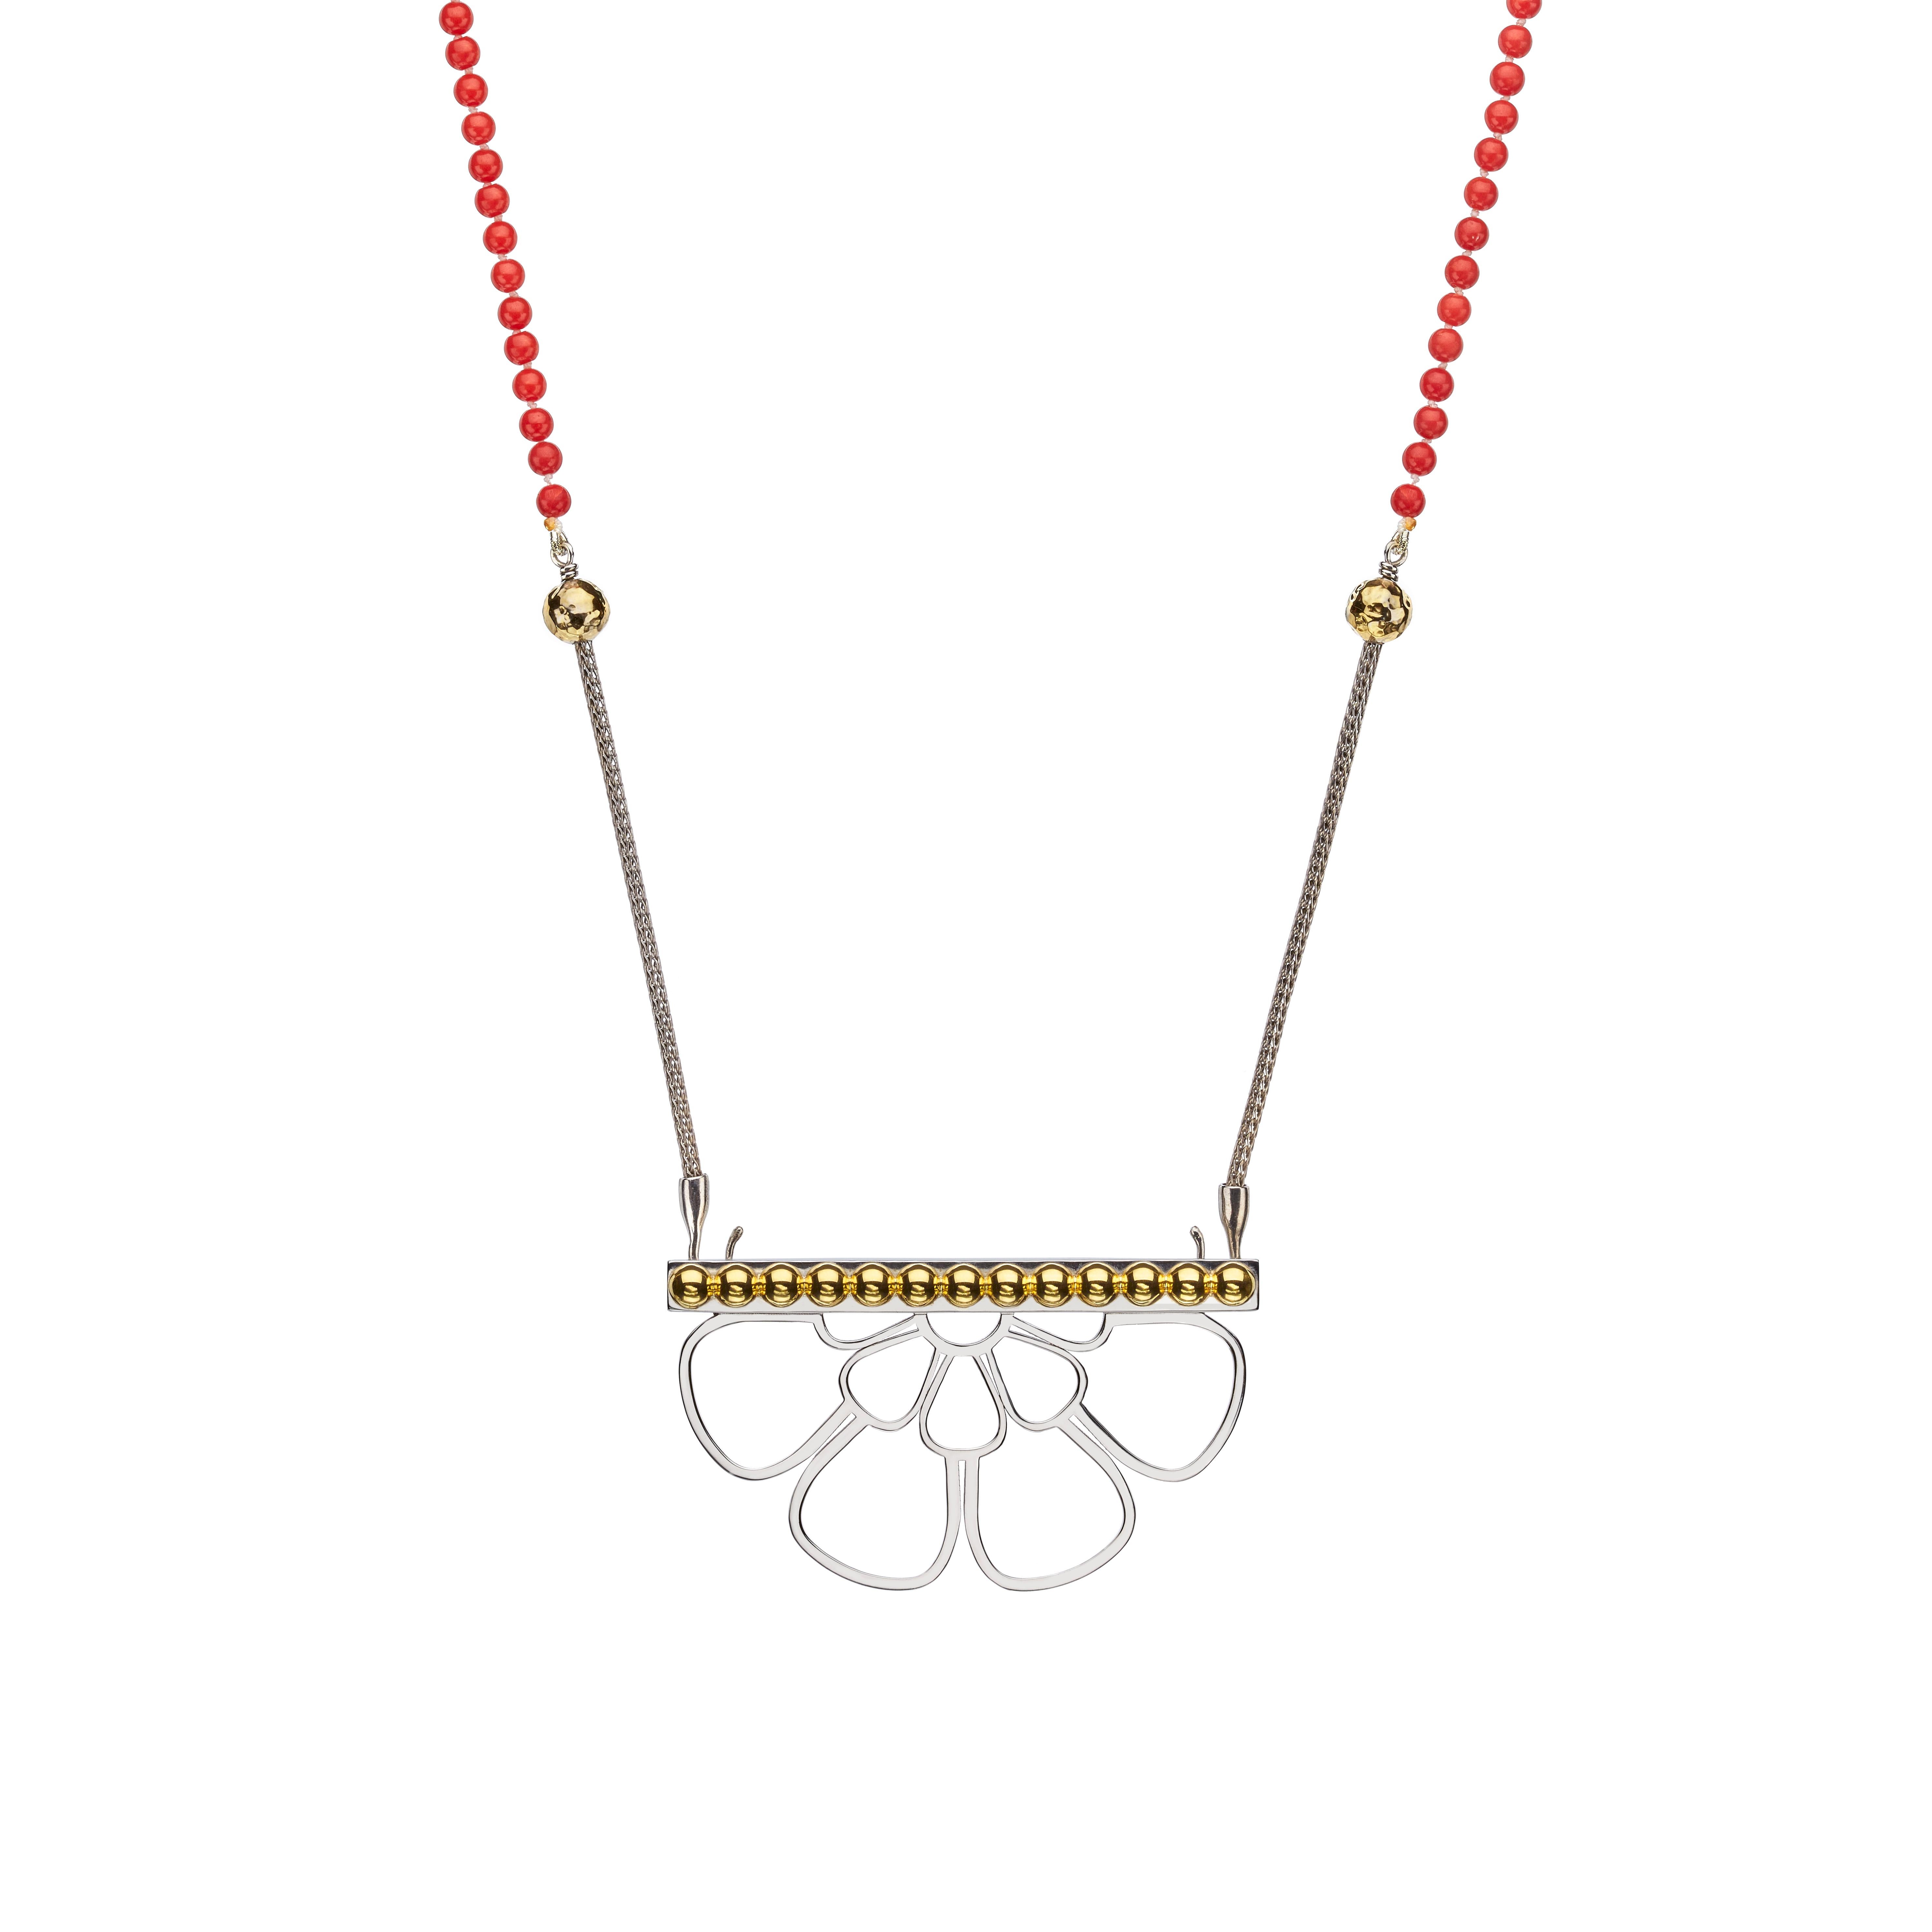 Ancient Greek Rosette Object D'Art which can be transformed into a Necklace, decorated with Red Coral beads in 18kt Gold and sterling Silver. 